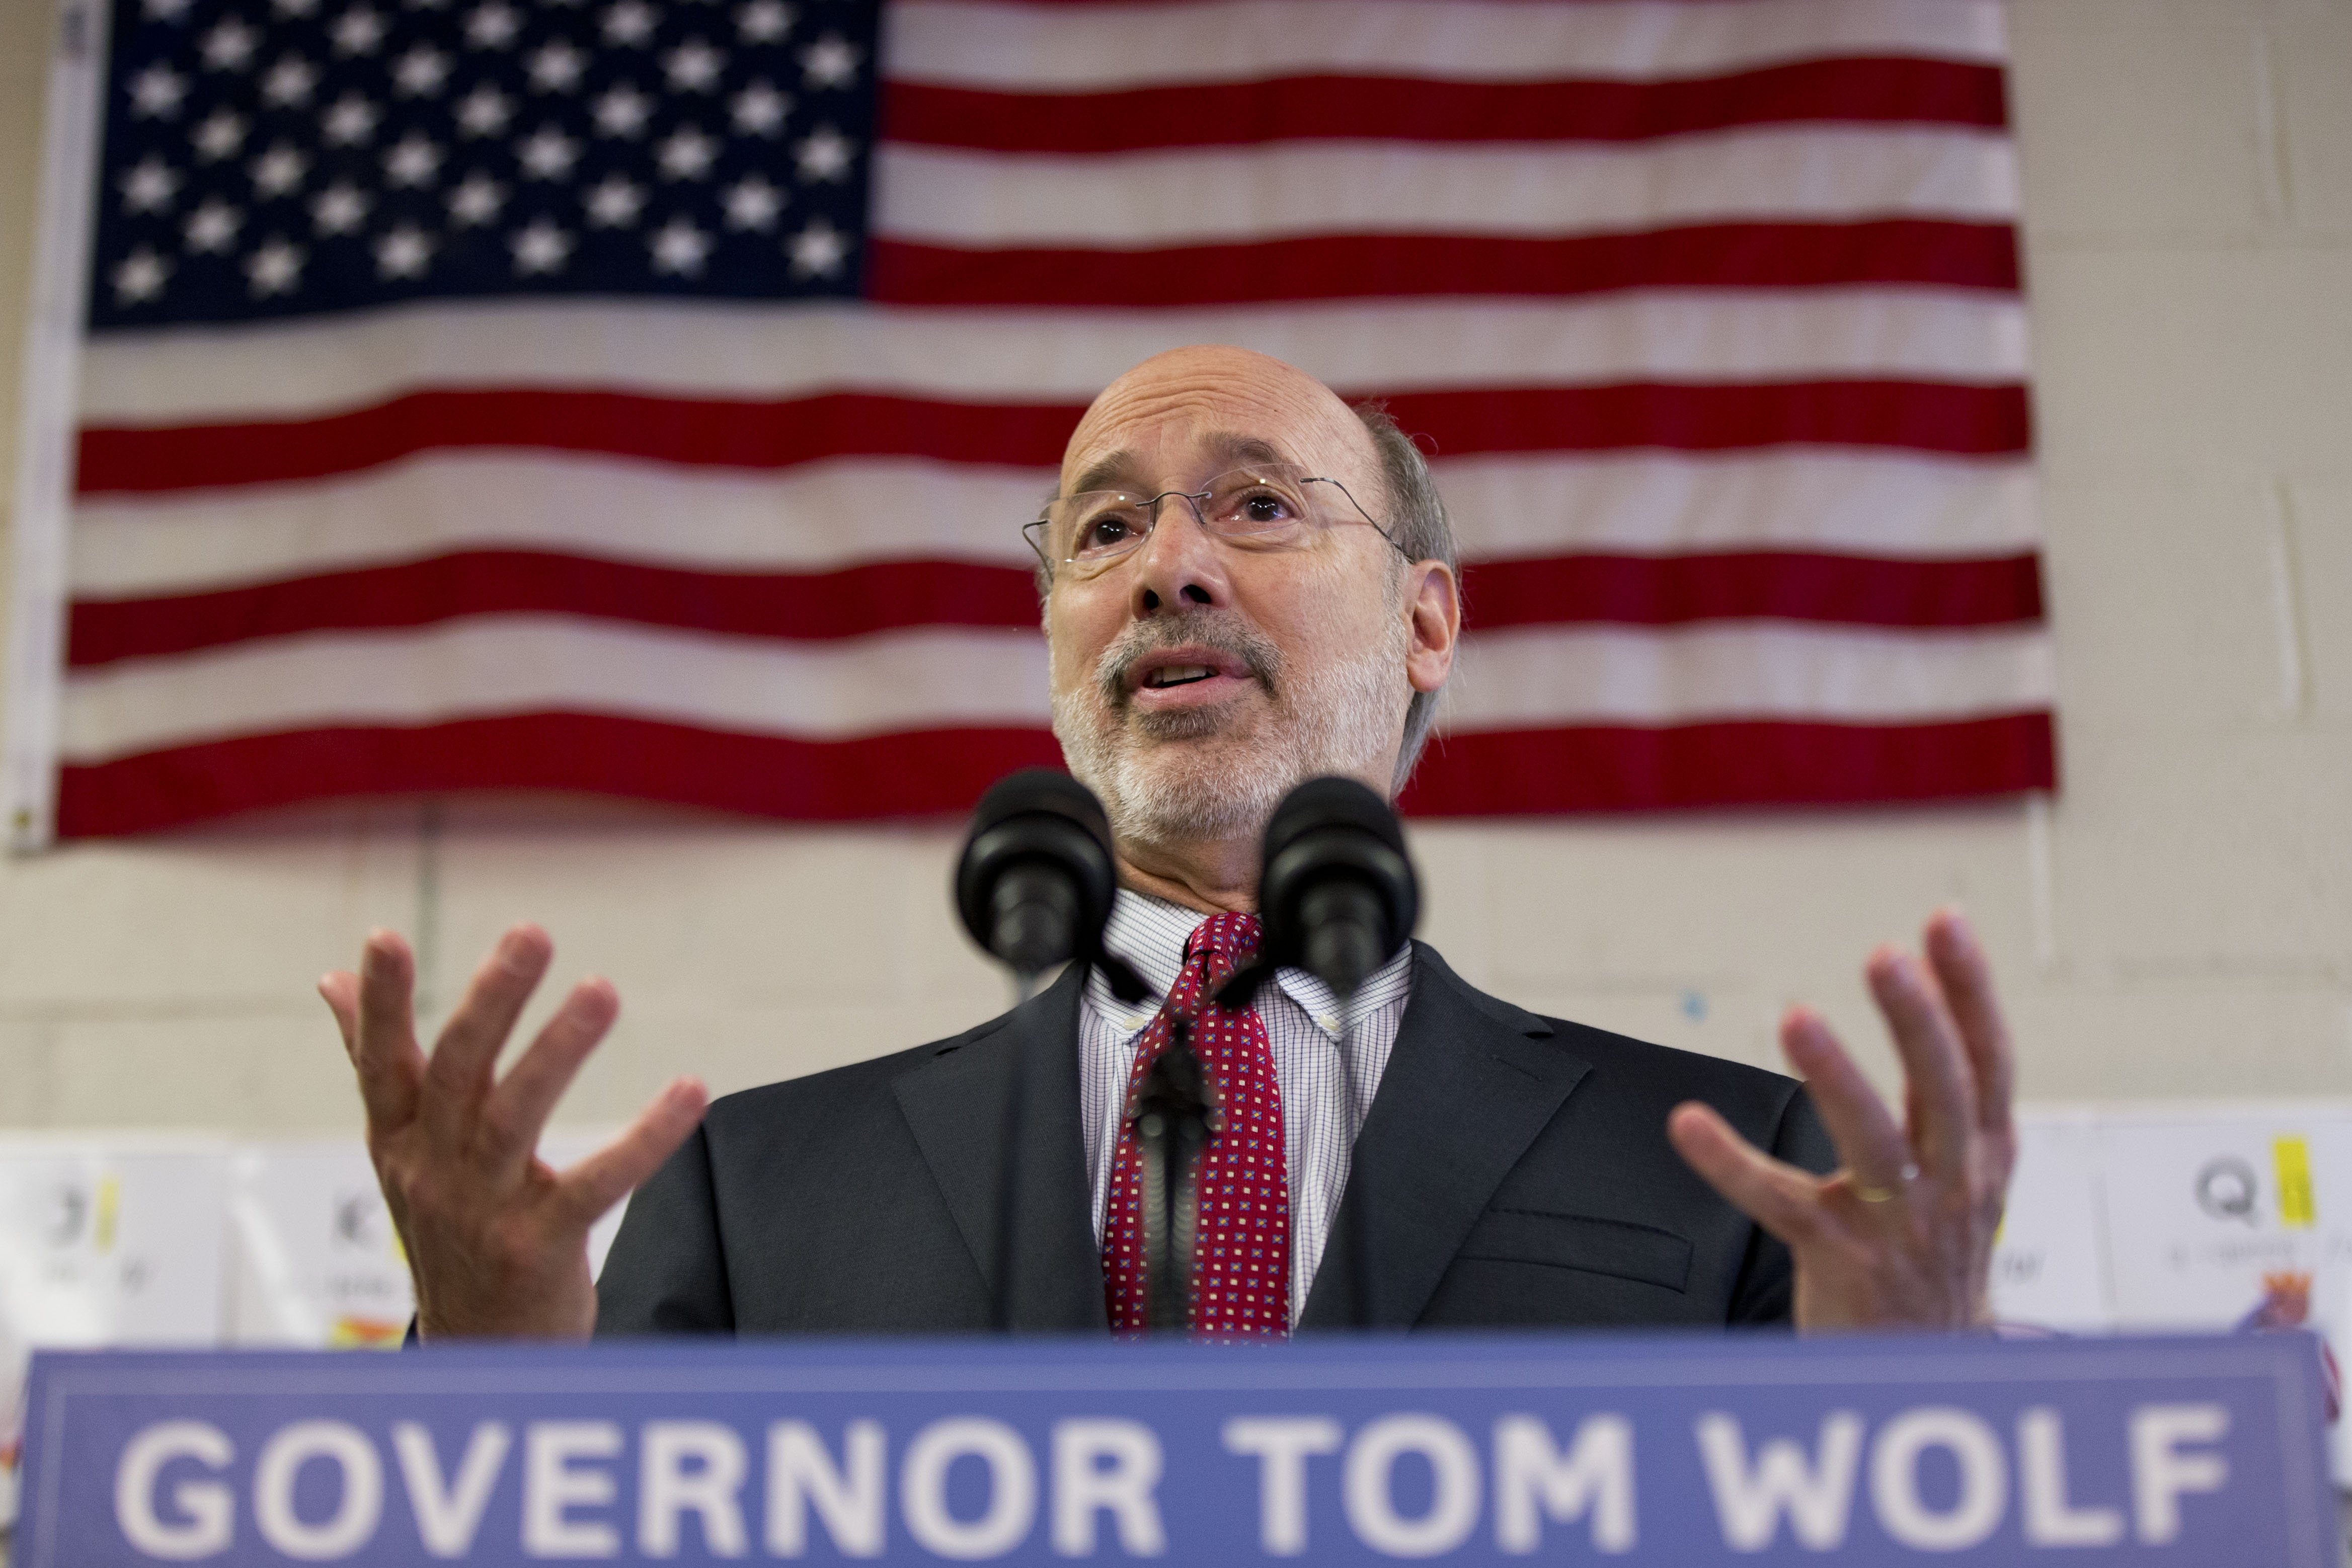 Gov. Tom Wolf Caln speaks during a news conference at Elementary School on Feb. 11, 2015, in Thorndale, Pa. (Matt Rourke—AP)